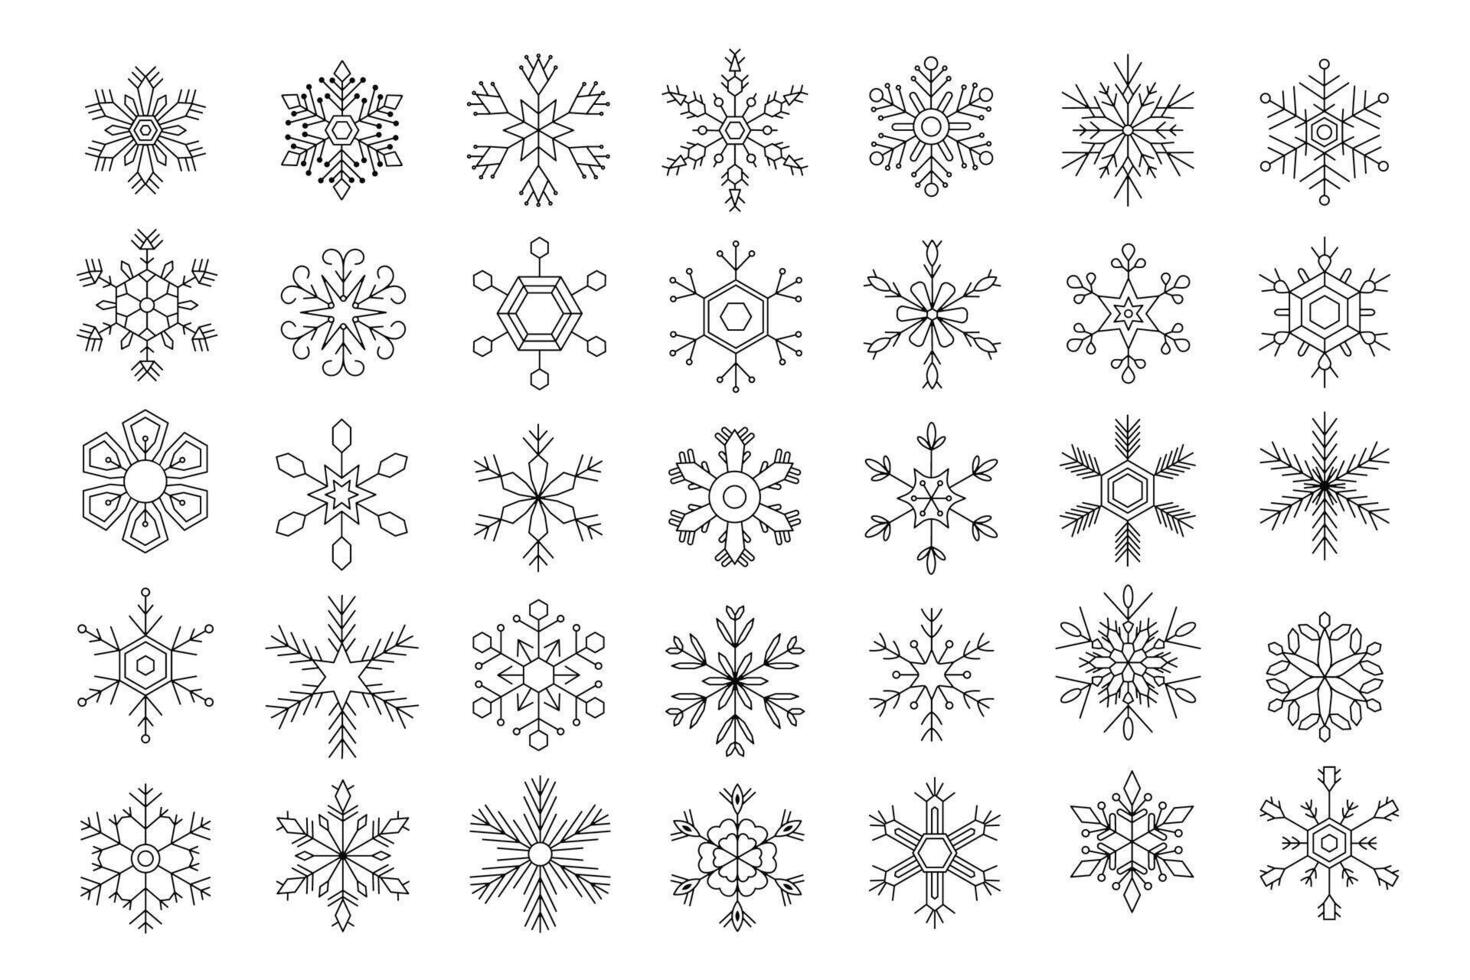 Snowflakes icons set. Cute snowflakes collection isolated on white background. Nice element for Christmas banner, cards. vector